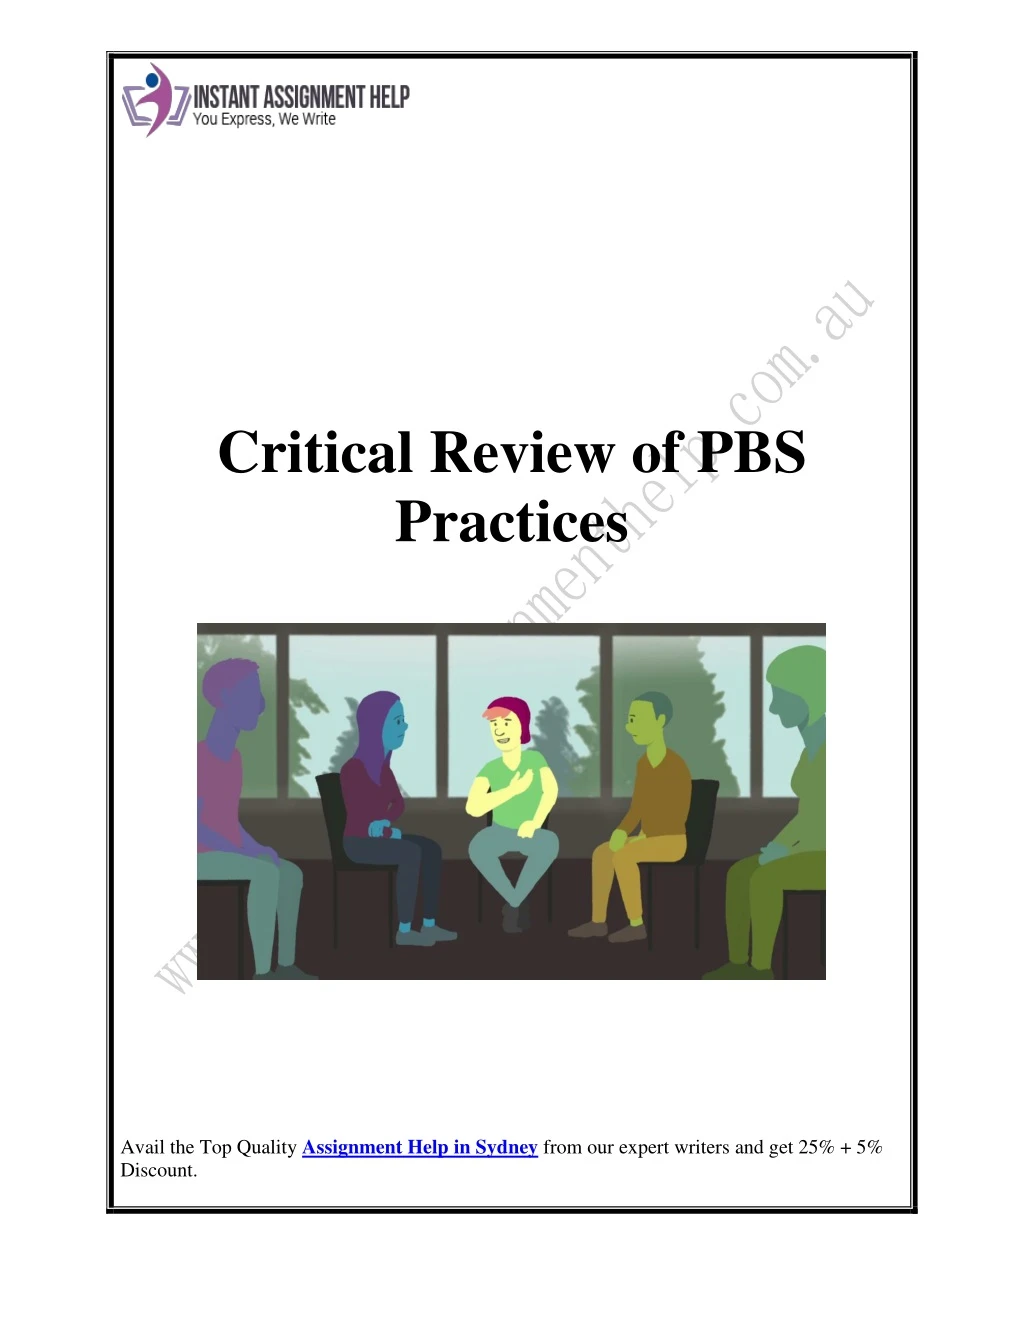 critical review of pbs practices